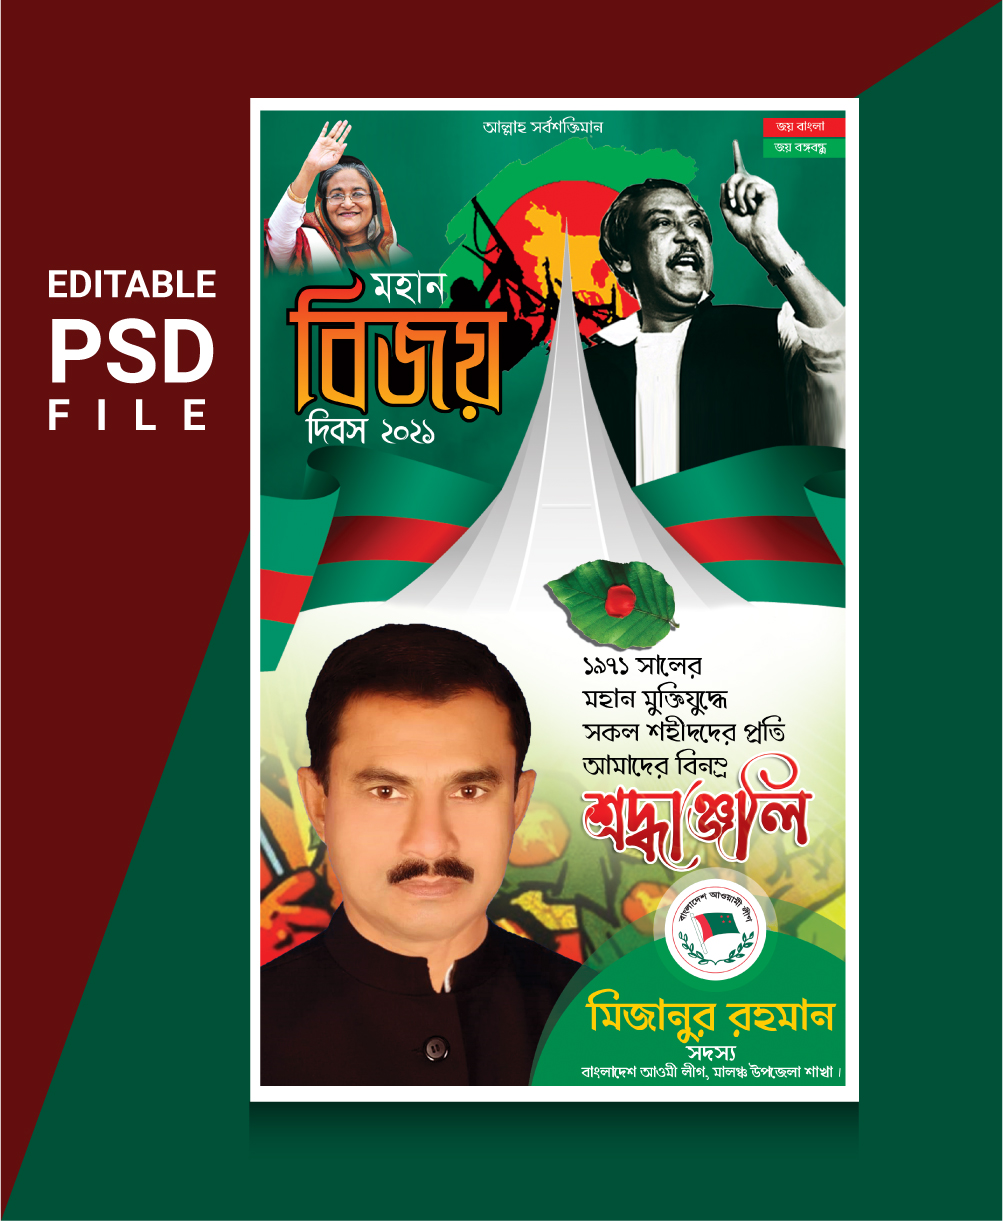 Victory Day Poster Design - Great Victory Day Poster - Victory Day Greetings Poster - bijoy dibos poster - NeotericIT.com